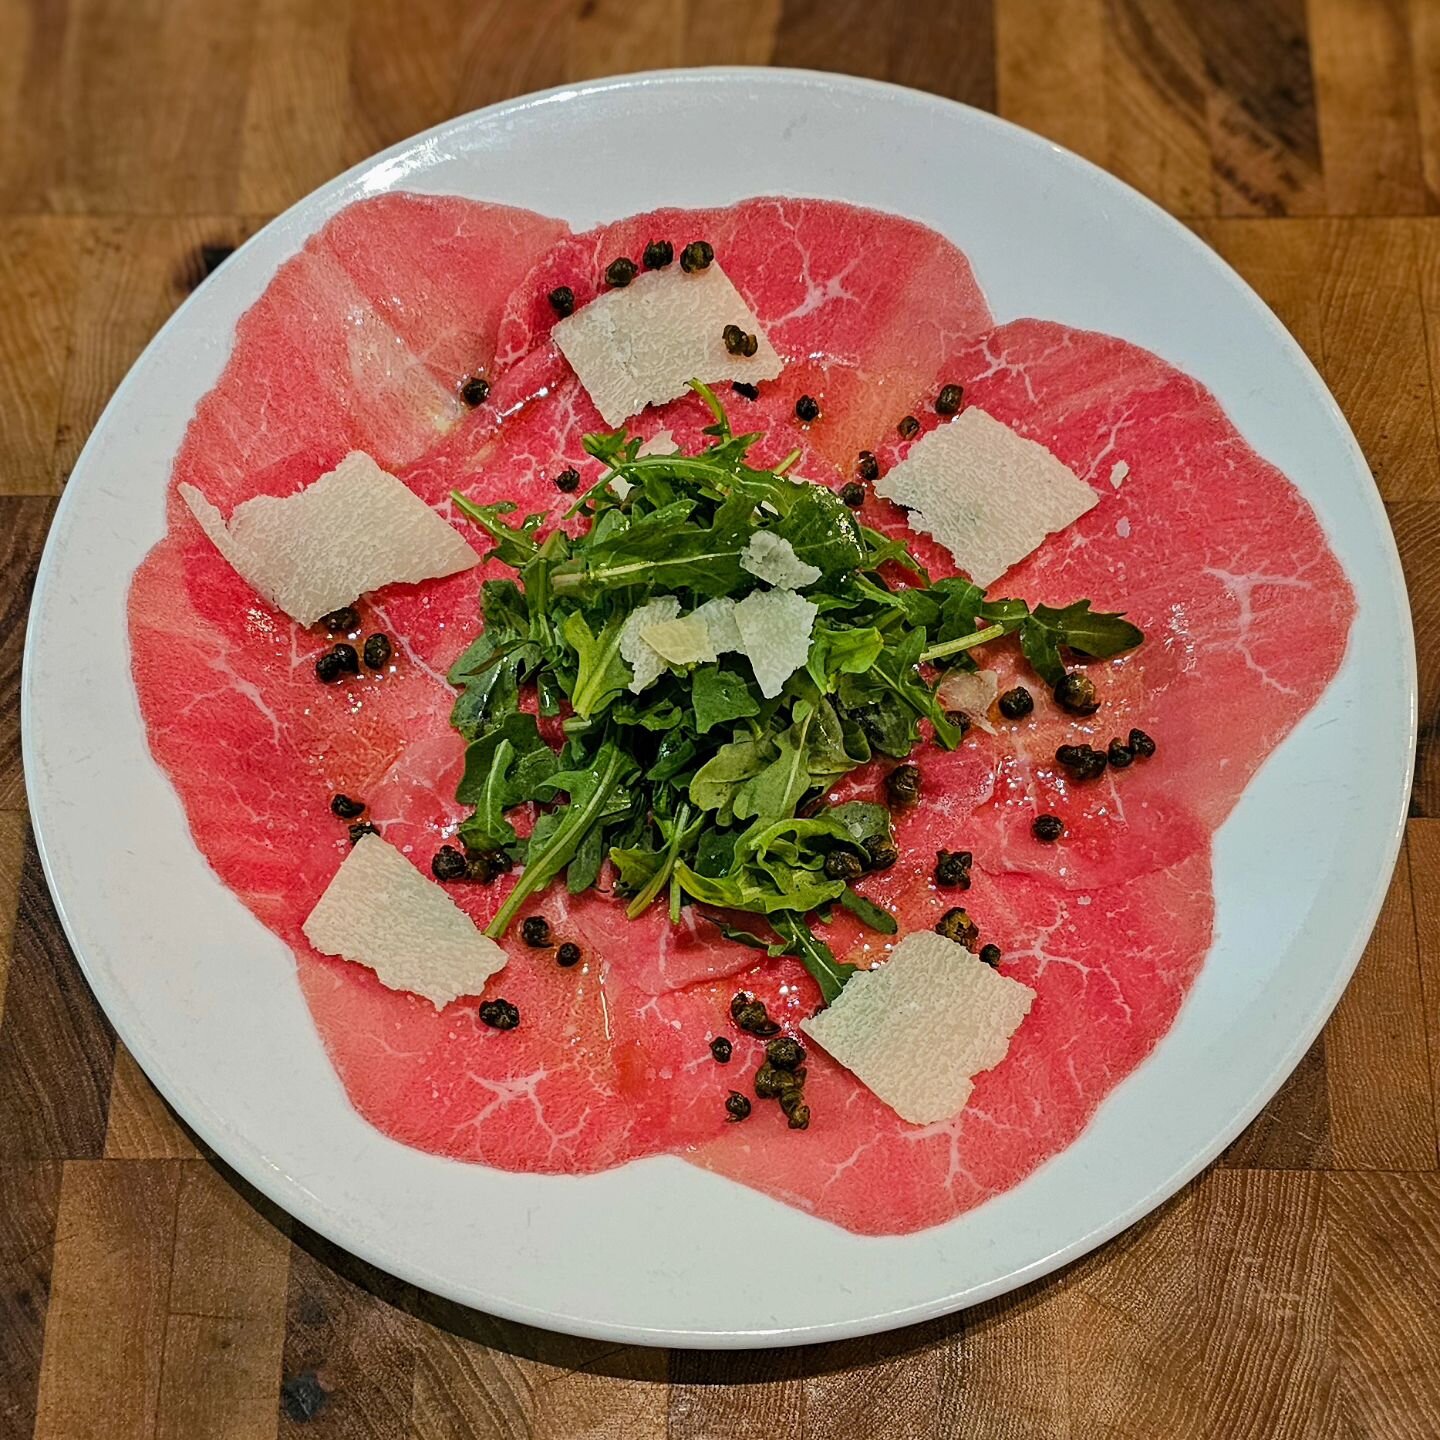 One great way to start an Italian meal is with our beef carpaccio. Here, beef is shaved paper thin and then fanned across the plate. We then add arugula, parmesan cheese, and fried capers to finish the dish. 

We are open for lunch and dinner Tuesday